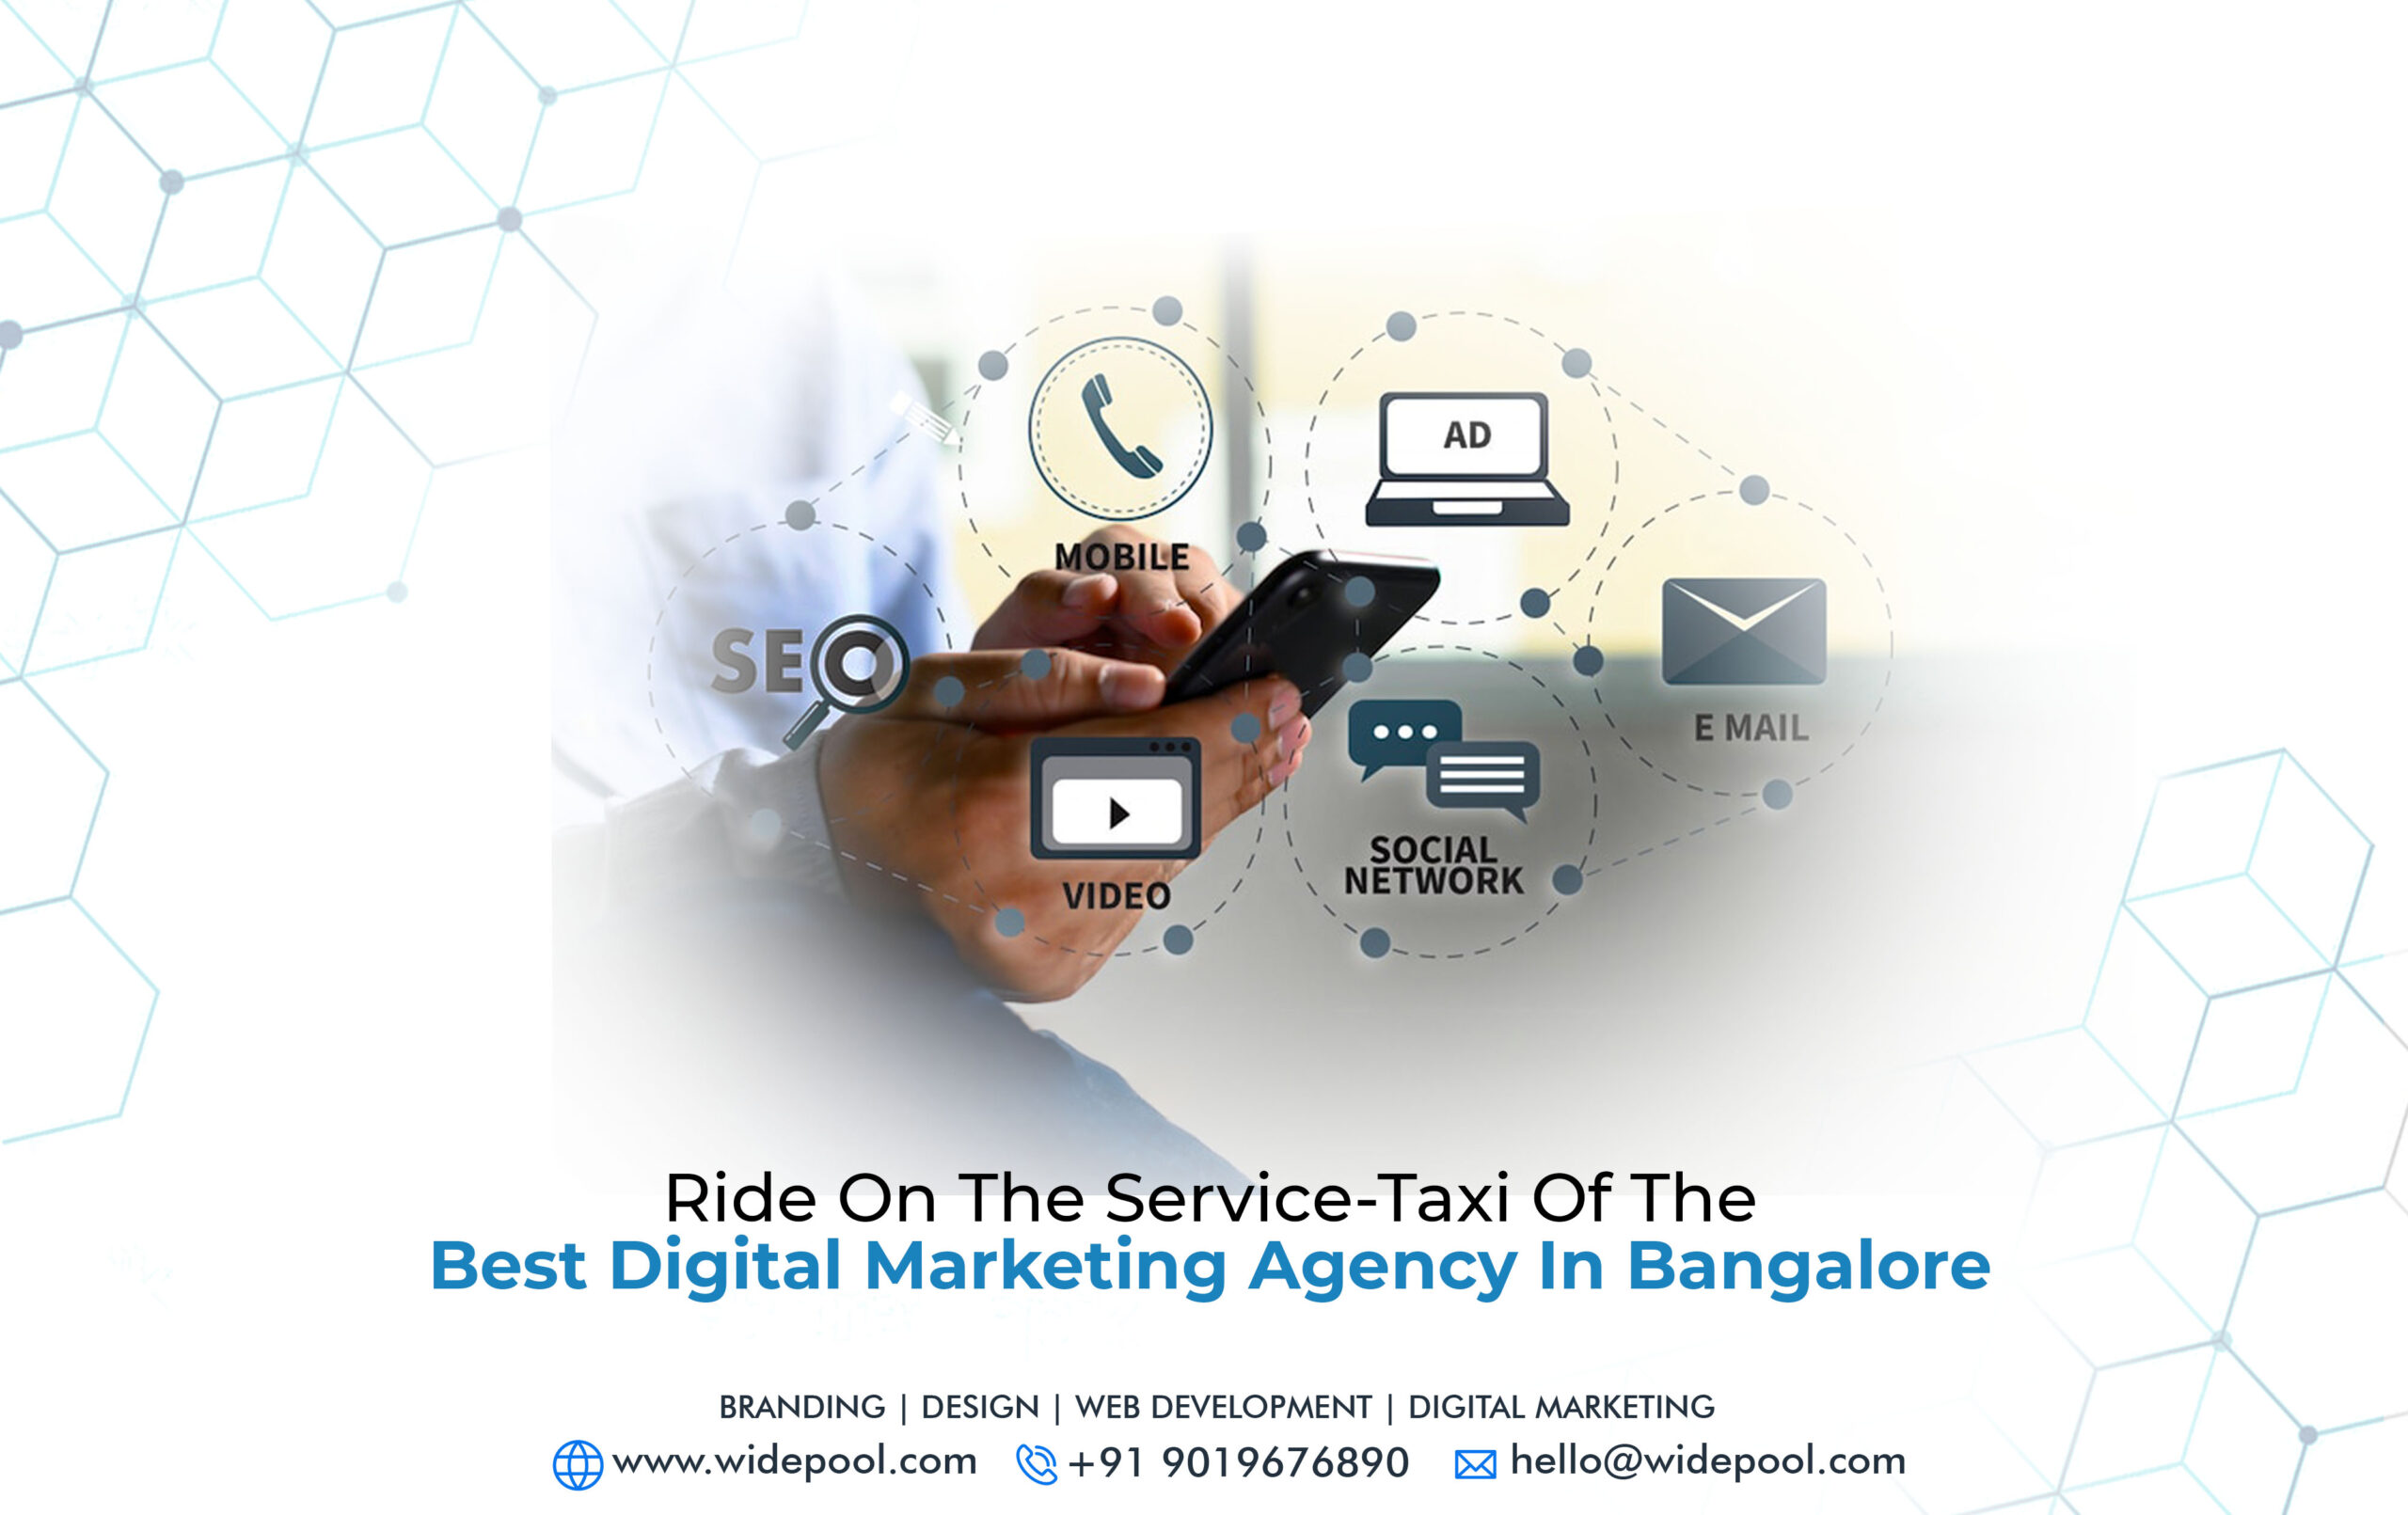 Ride on the Service-Taxi of the Best Digital Marketing Agency in Bangalore